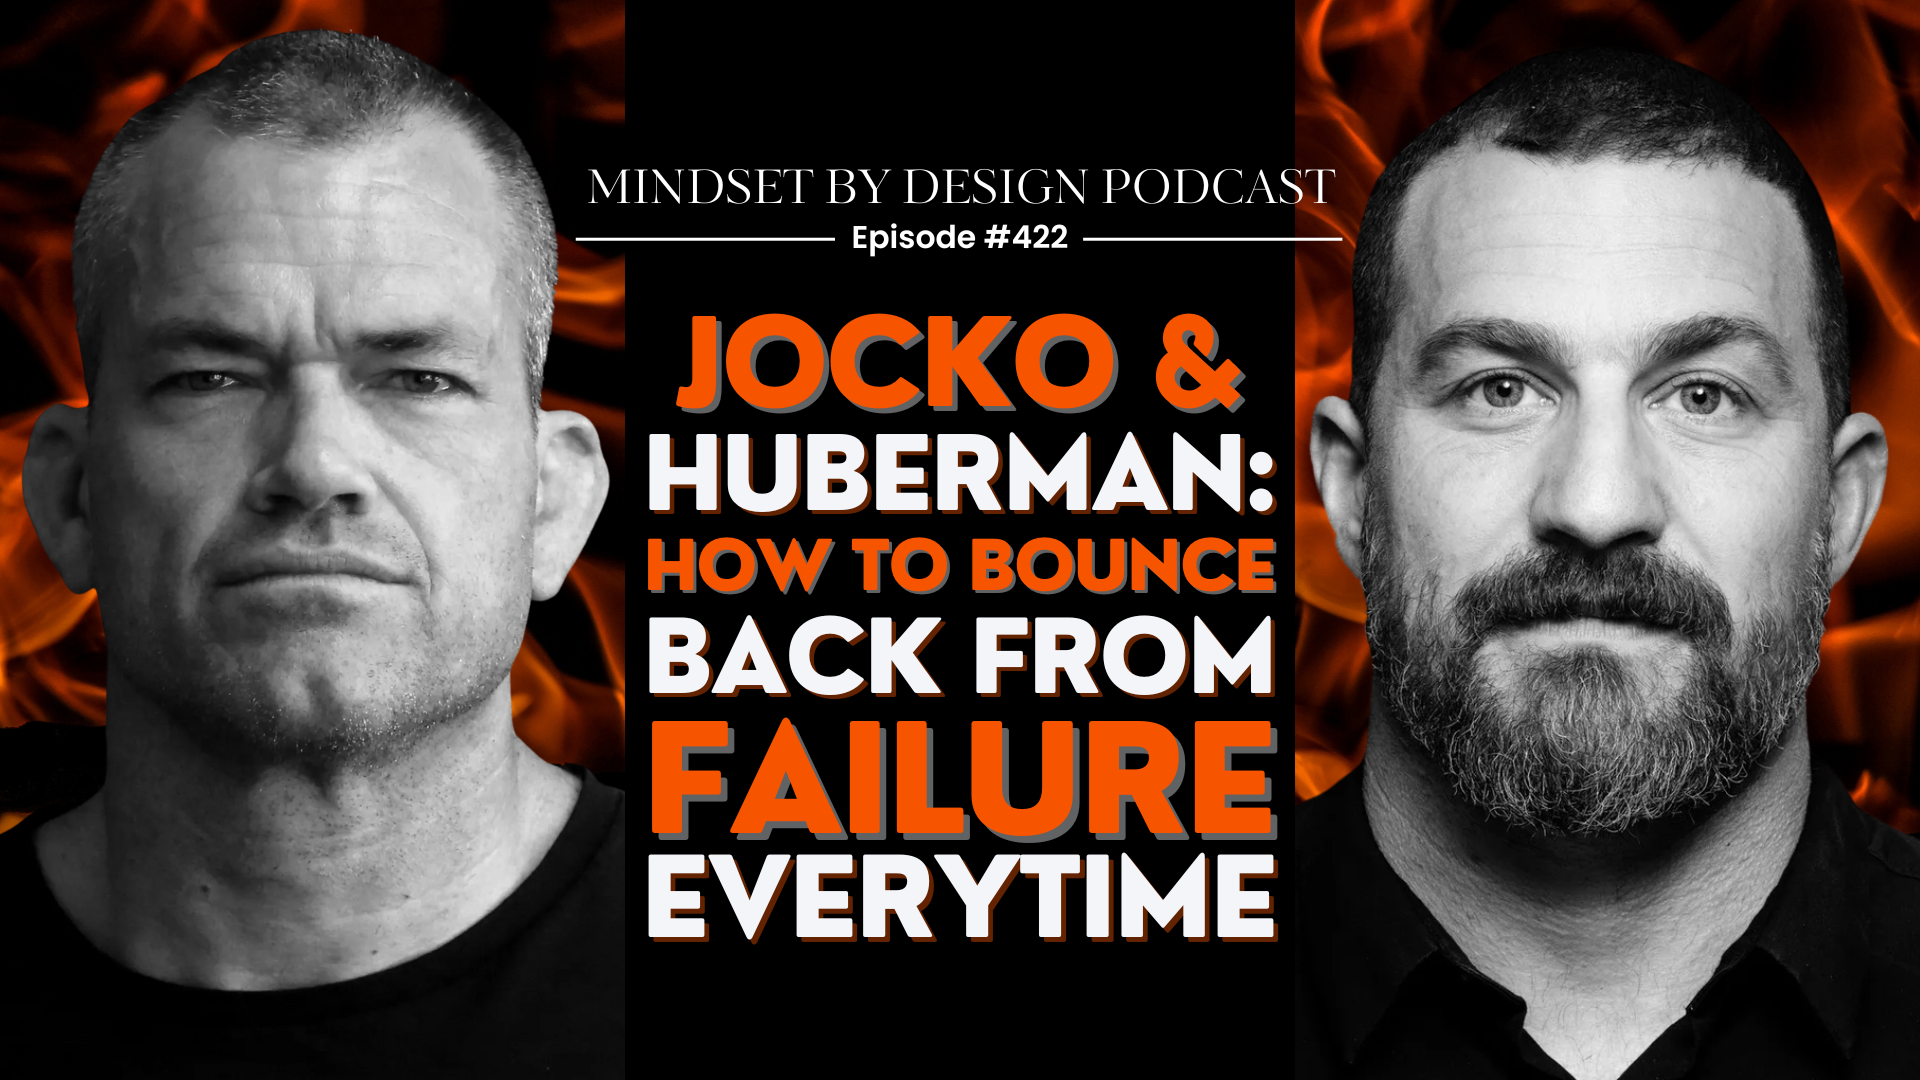 #422: Jocko & Huberman: How To Bounce Back From Failure Everytime